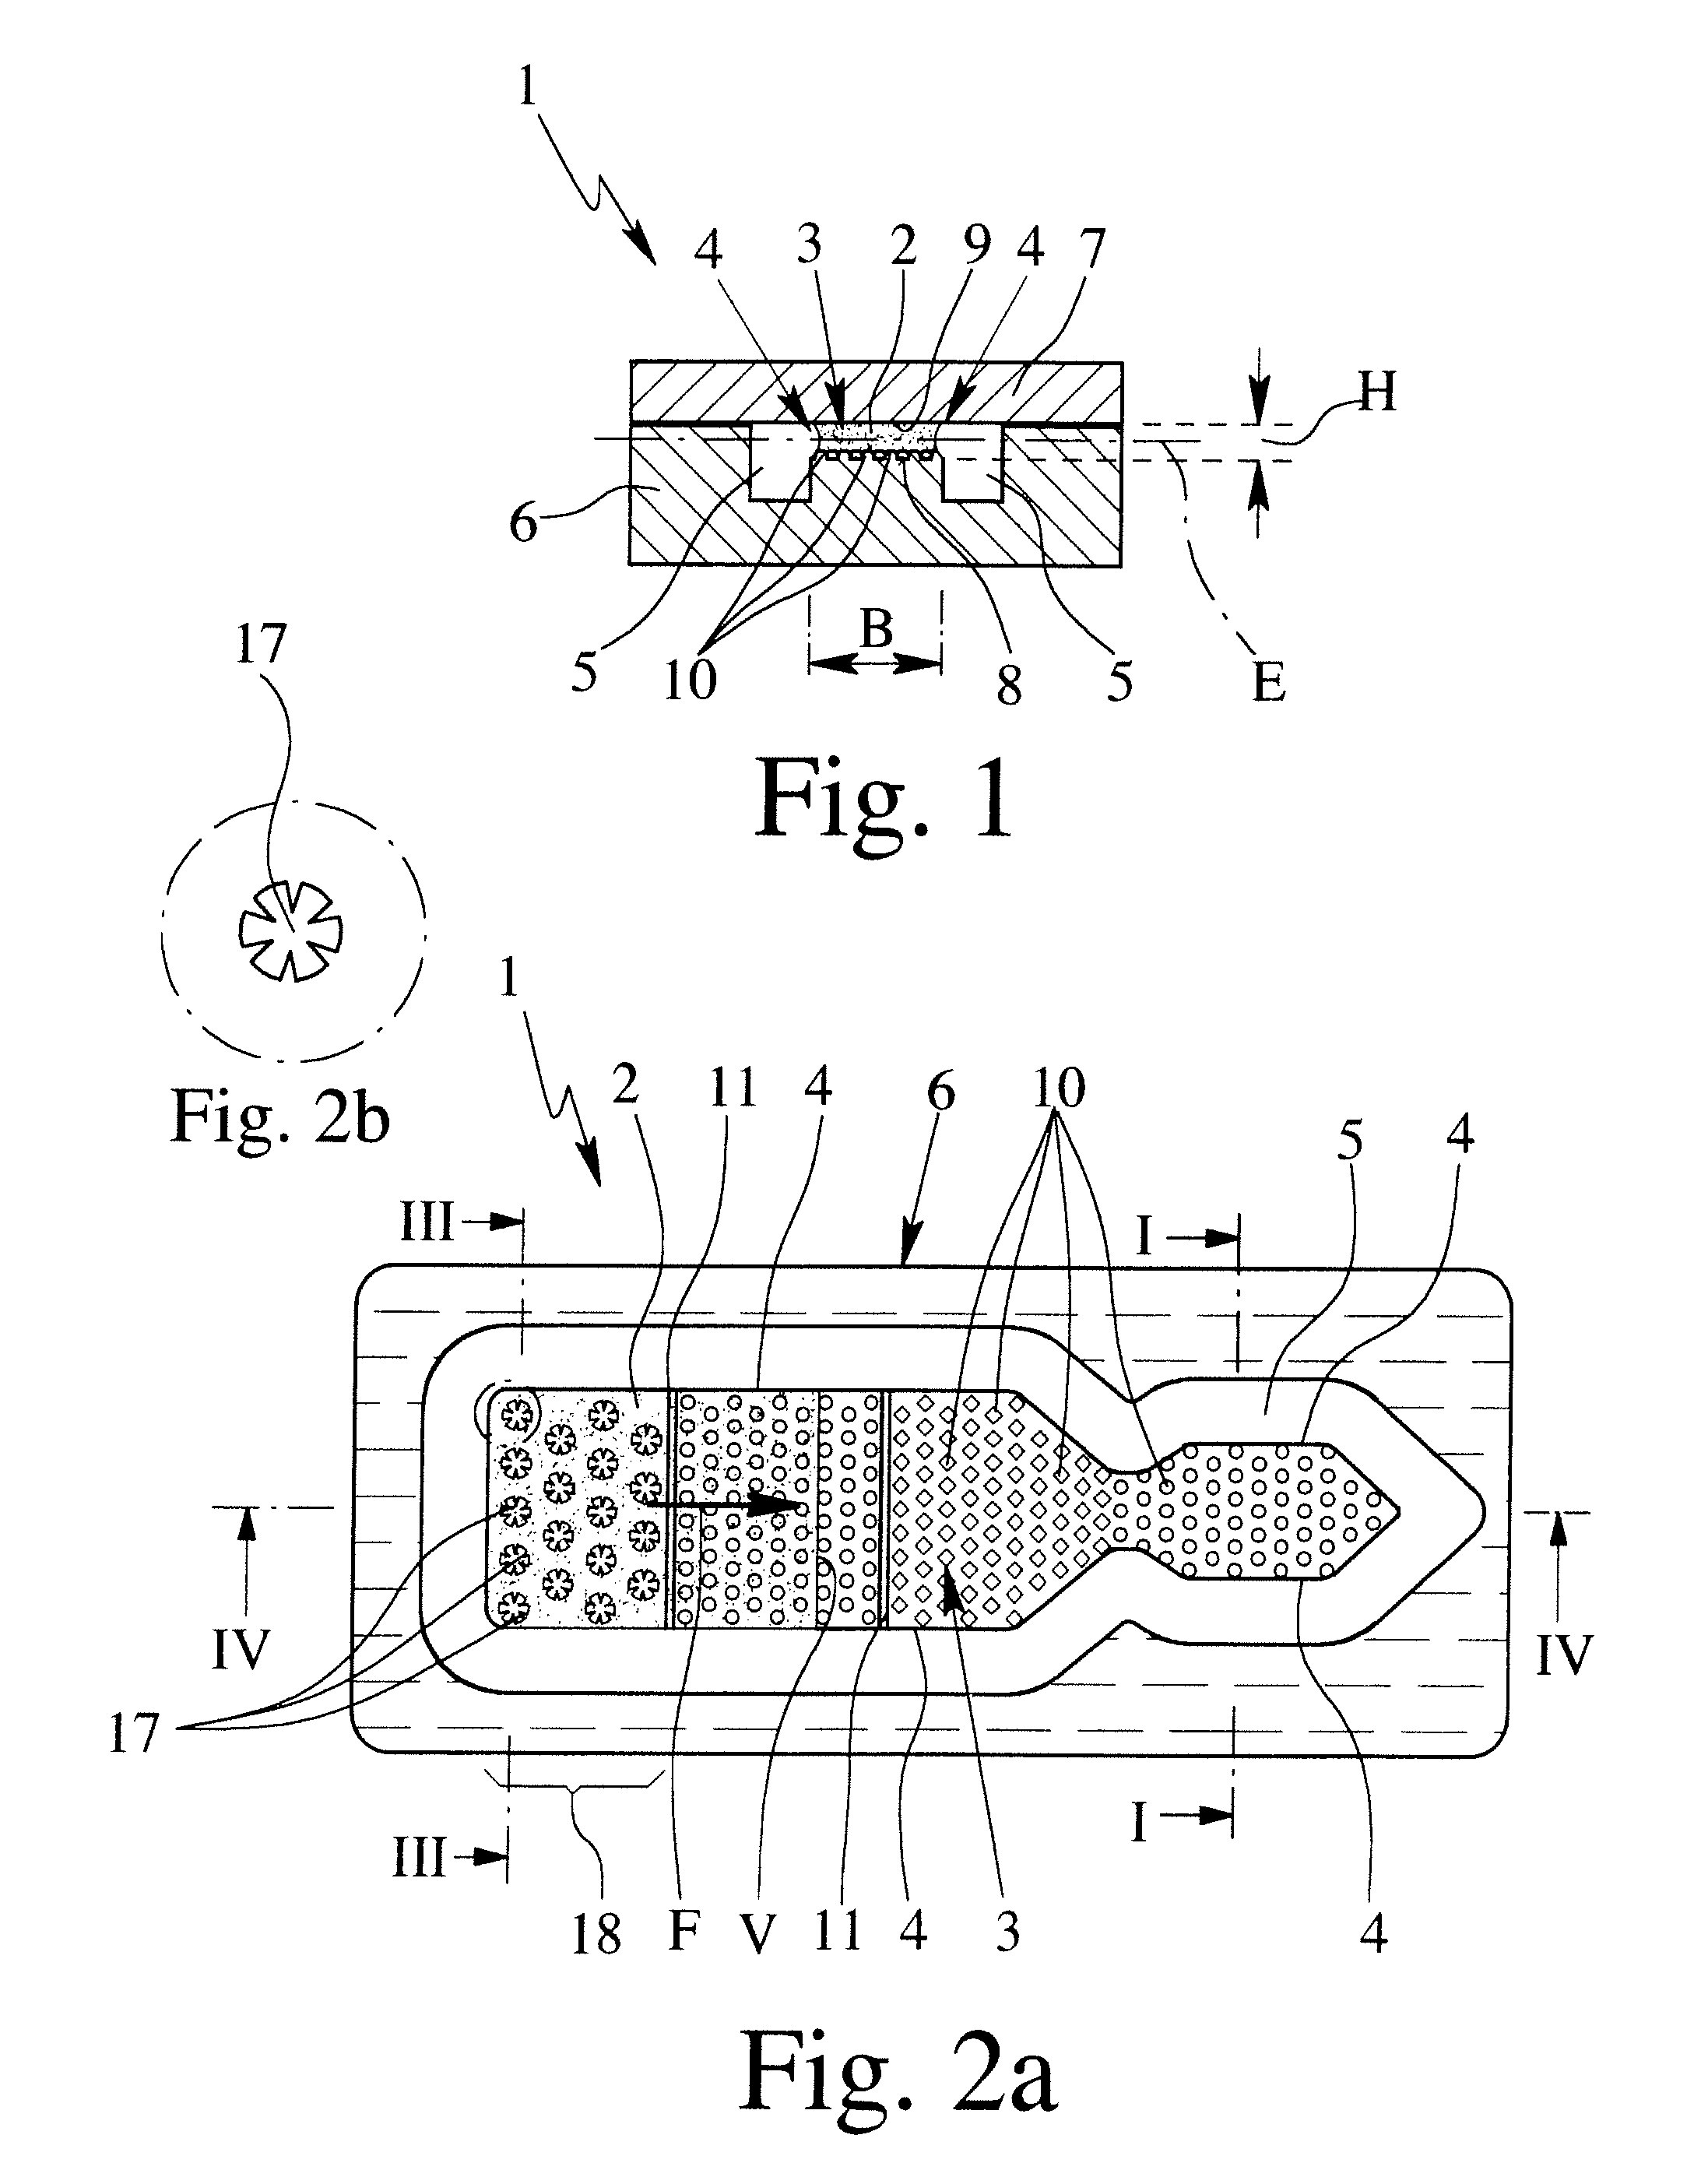 Device for Collecting Blood and Separating Blood Constituents, Method for Separating Blood Constituents and Use of Said Device